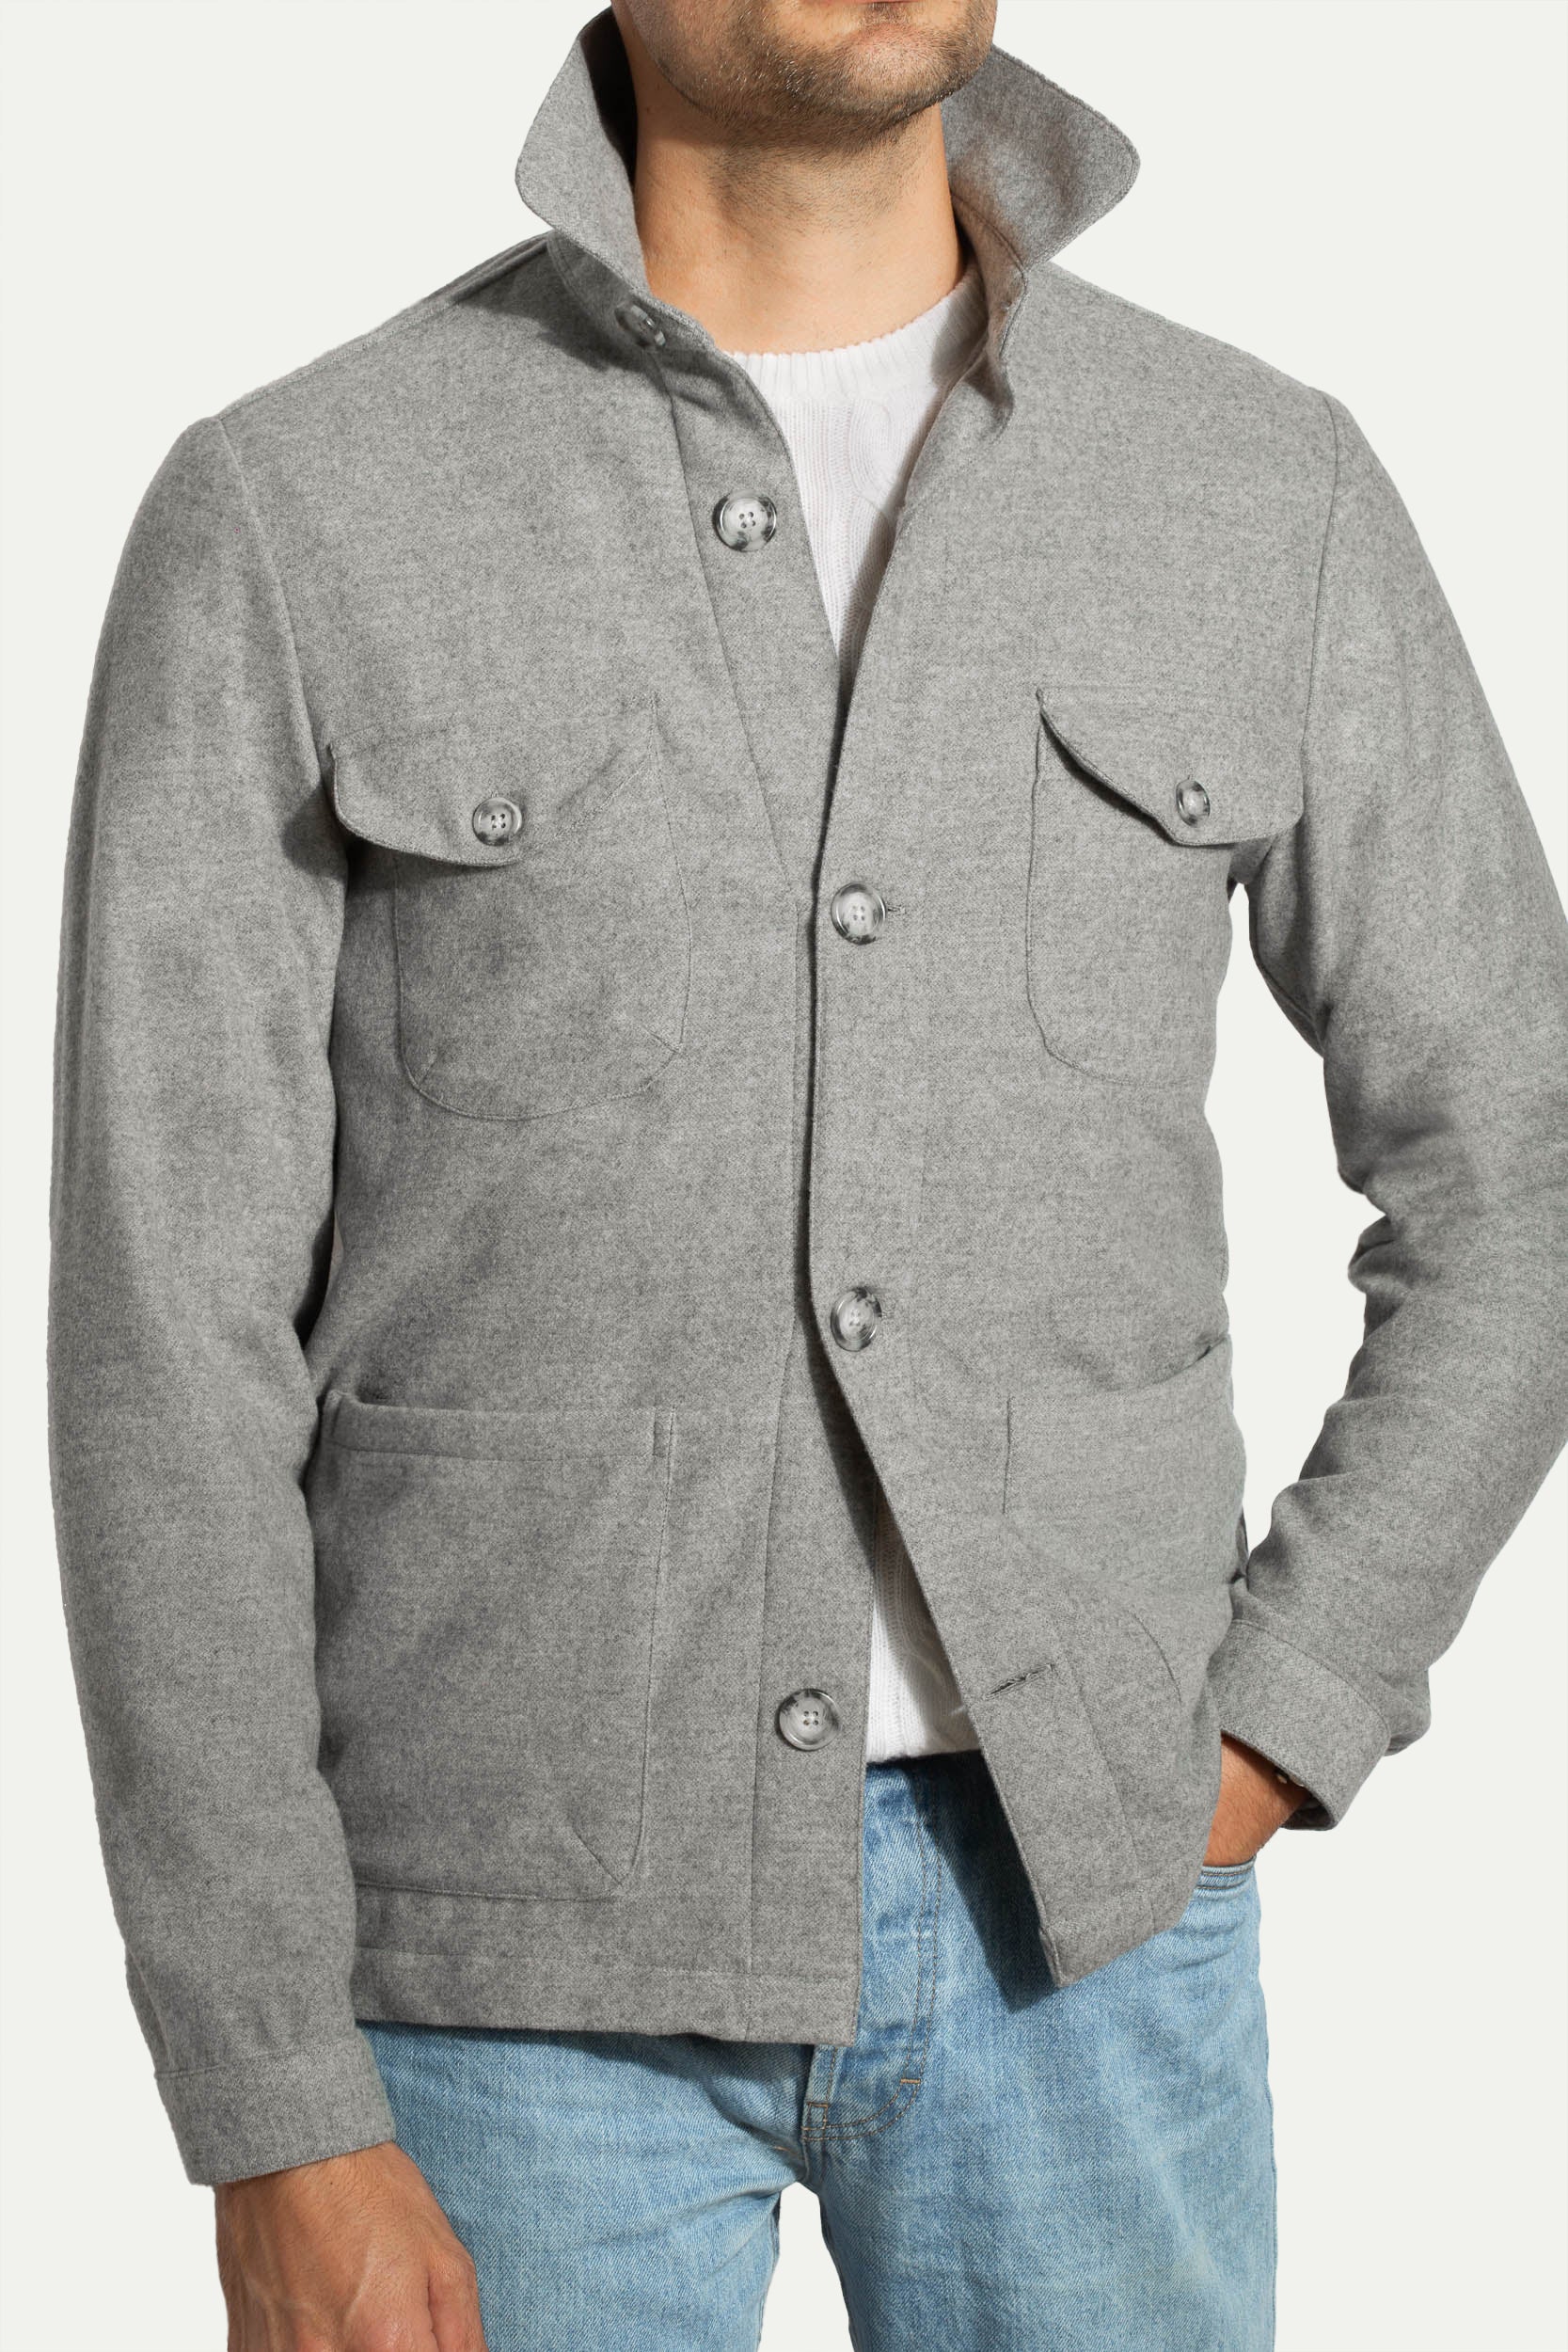 Grey Safari Jacket flannel Super 180'S, Made in Italy